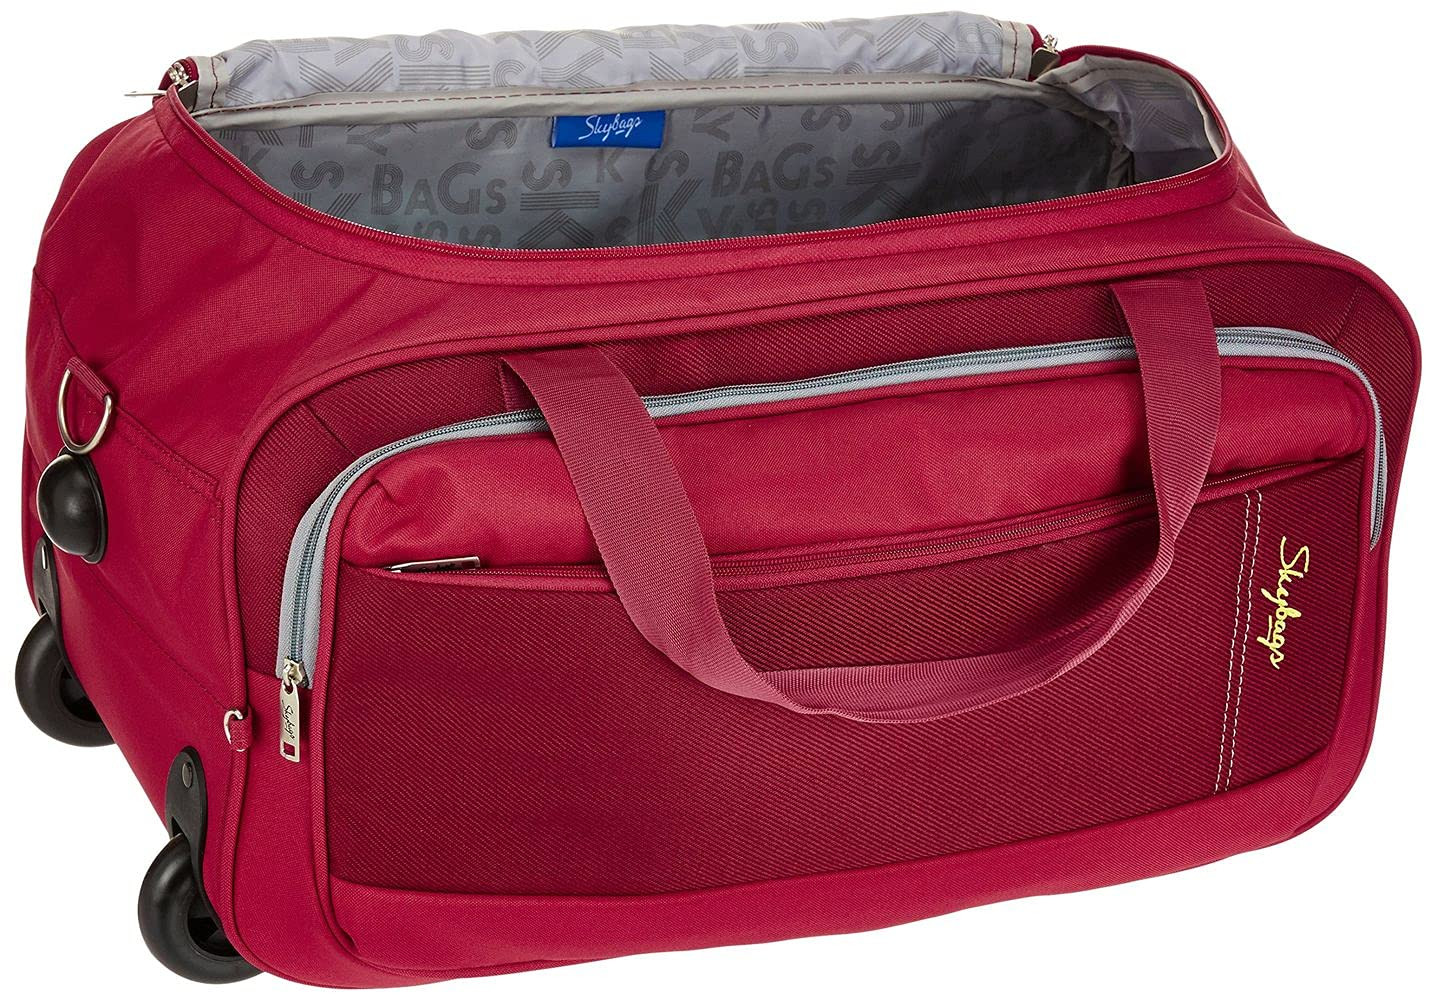 Skybags Cardiff Polyester 52 Cms Wheel Travel Duffle Bag Red 28 Centimeters